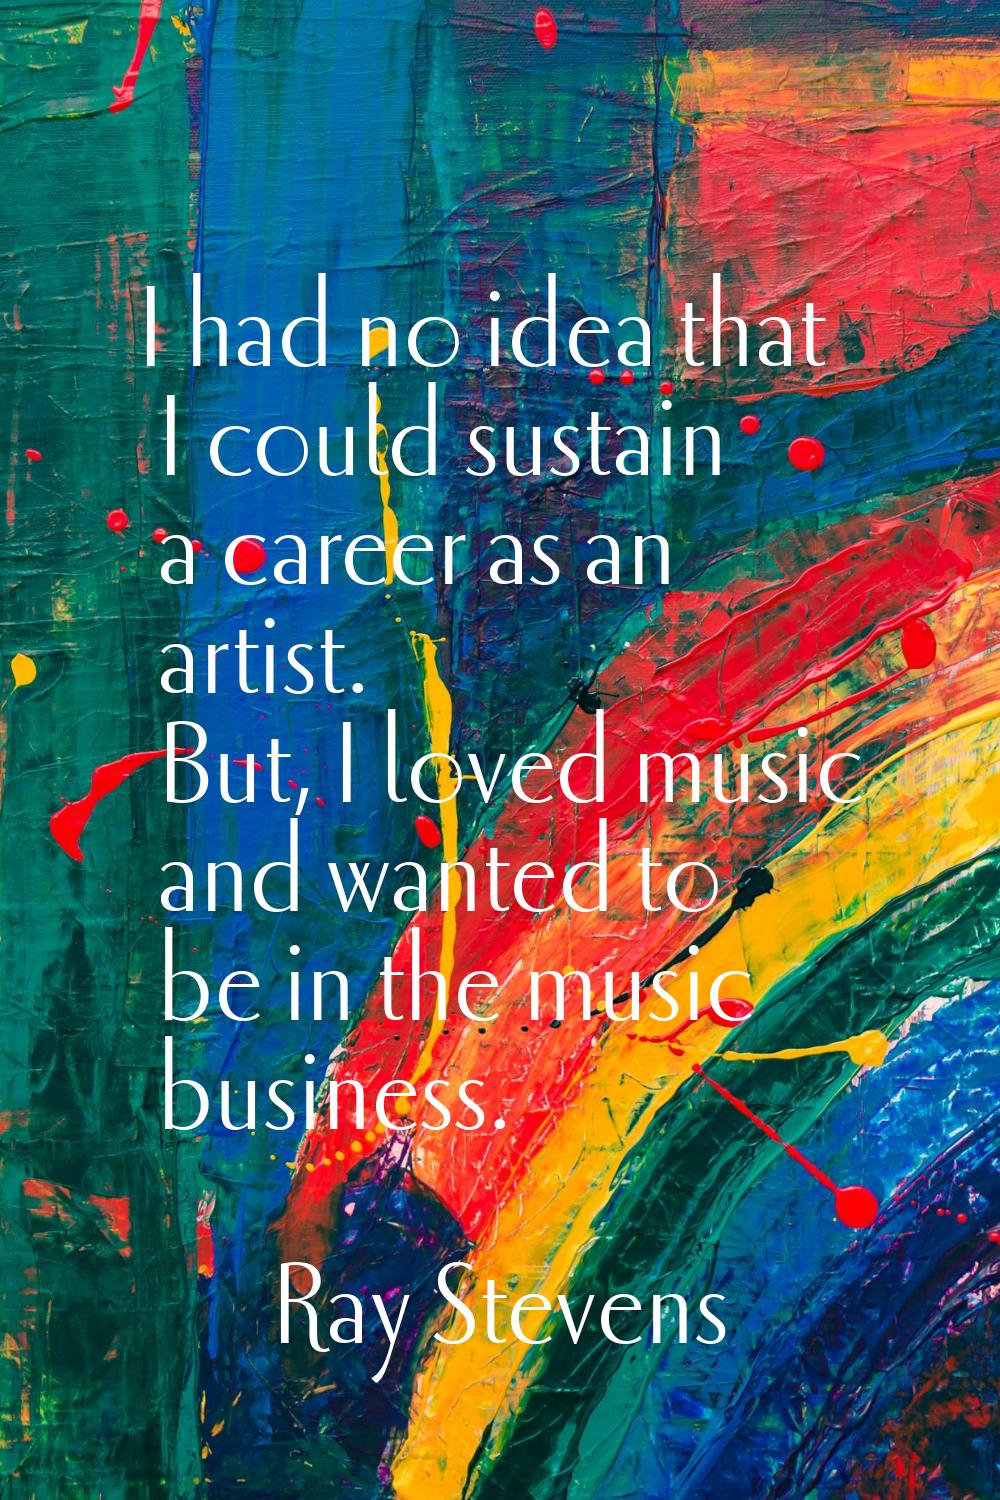 I had no idea that I could sustain a career as an artist. But, I loved music and wanted to be in th